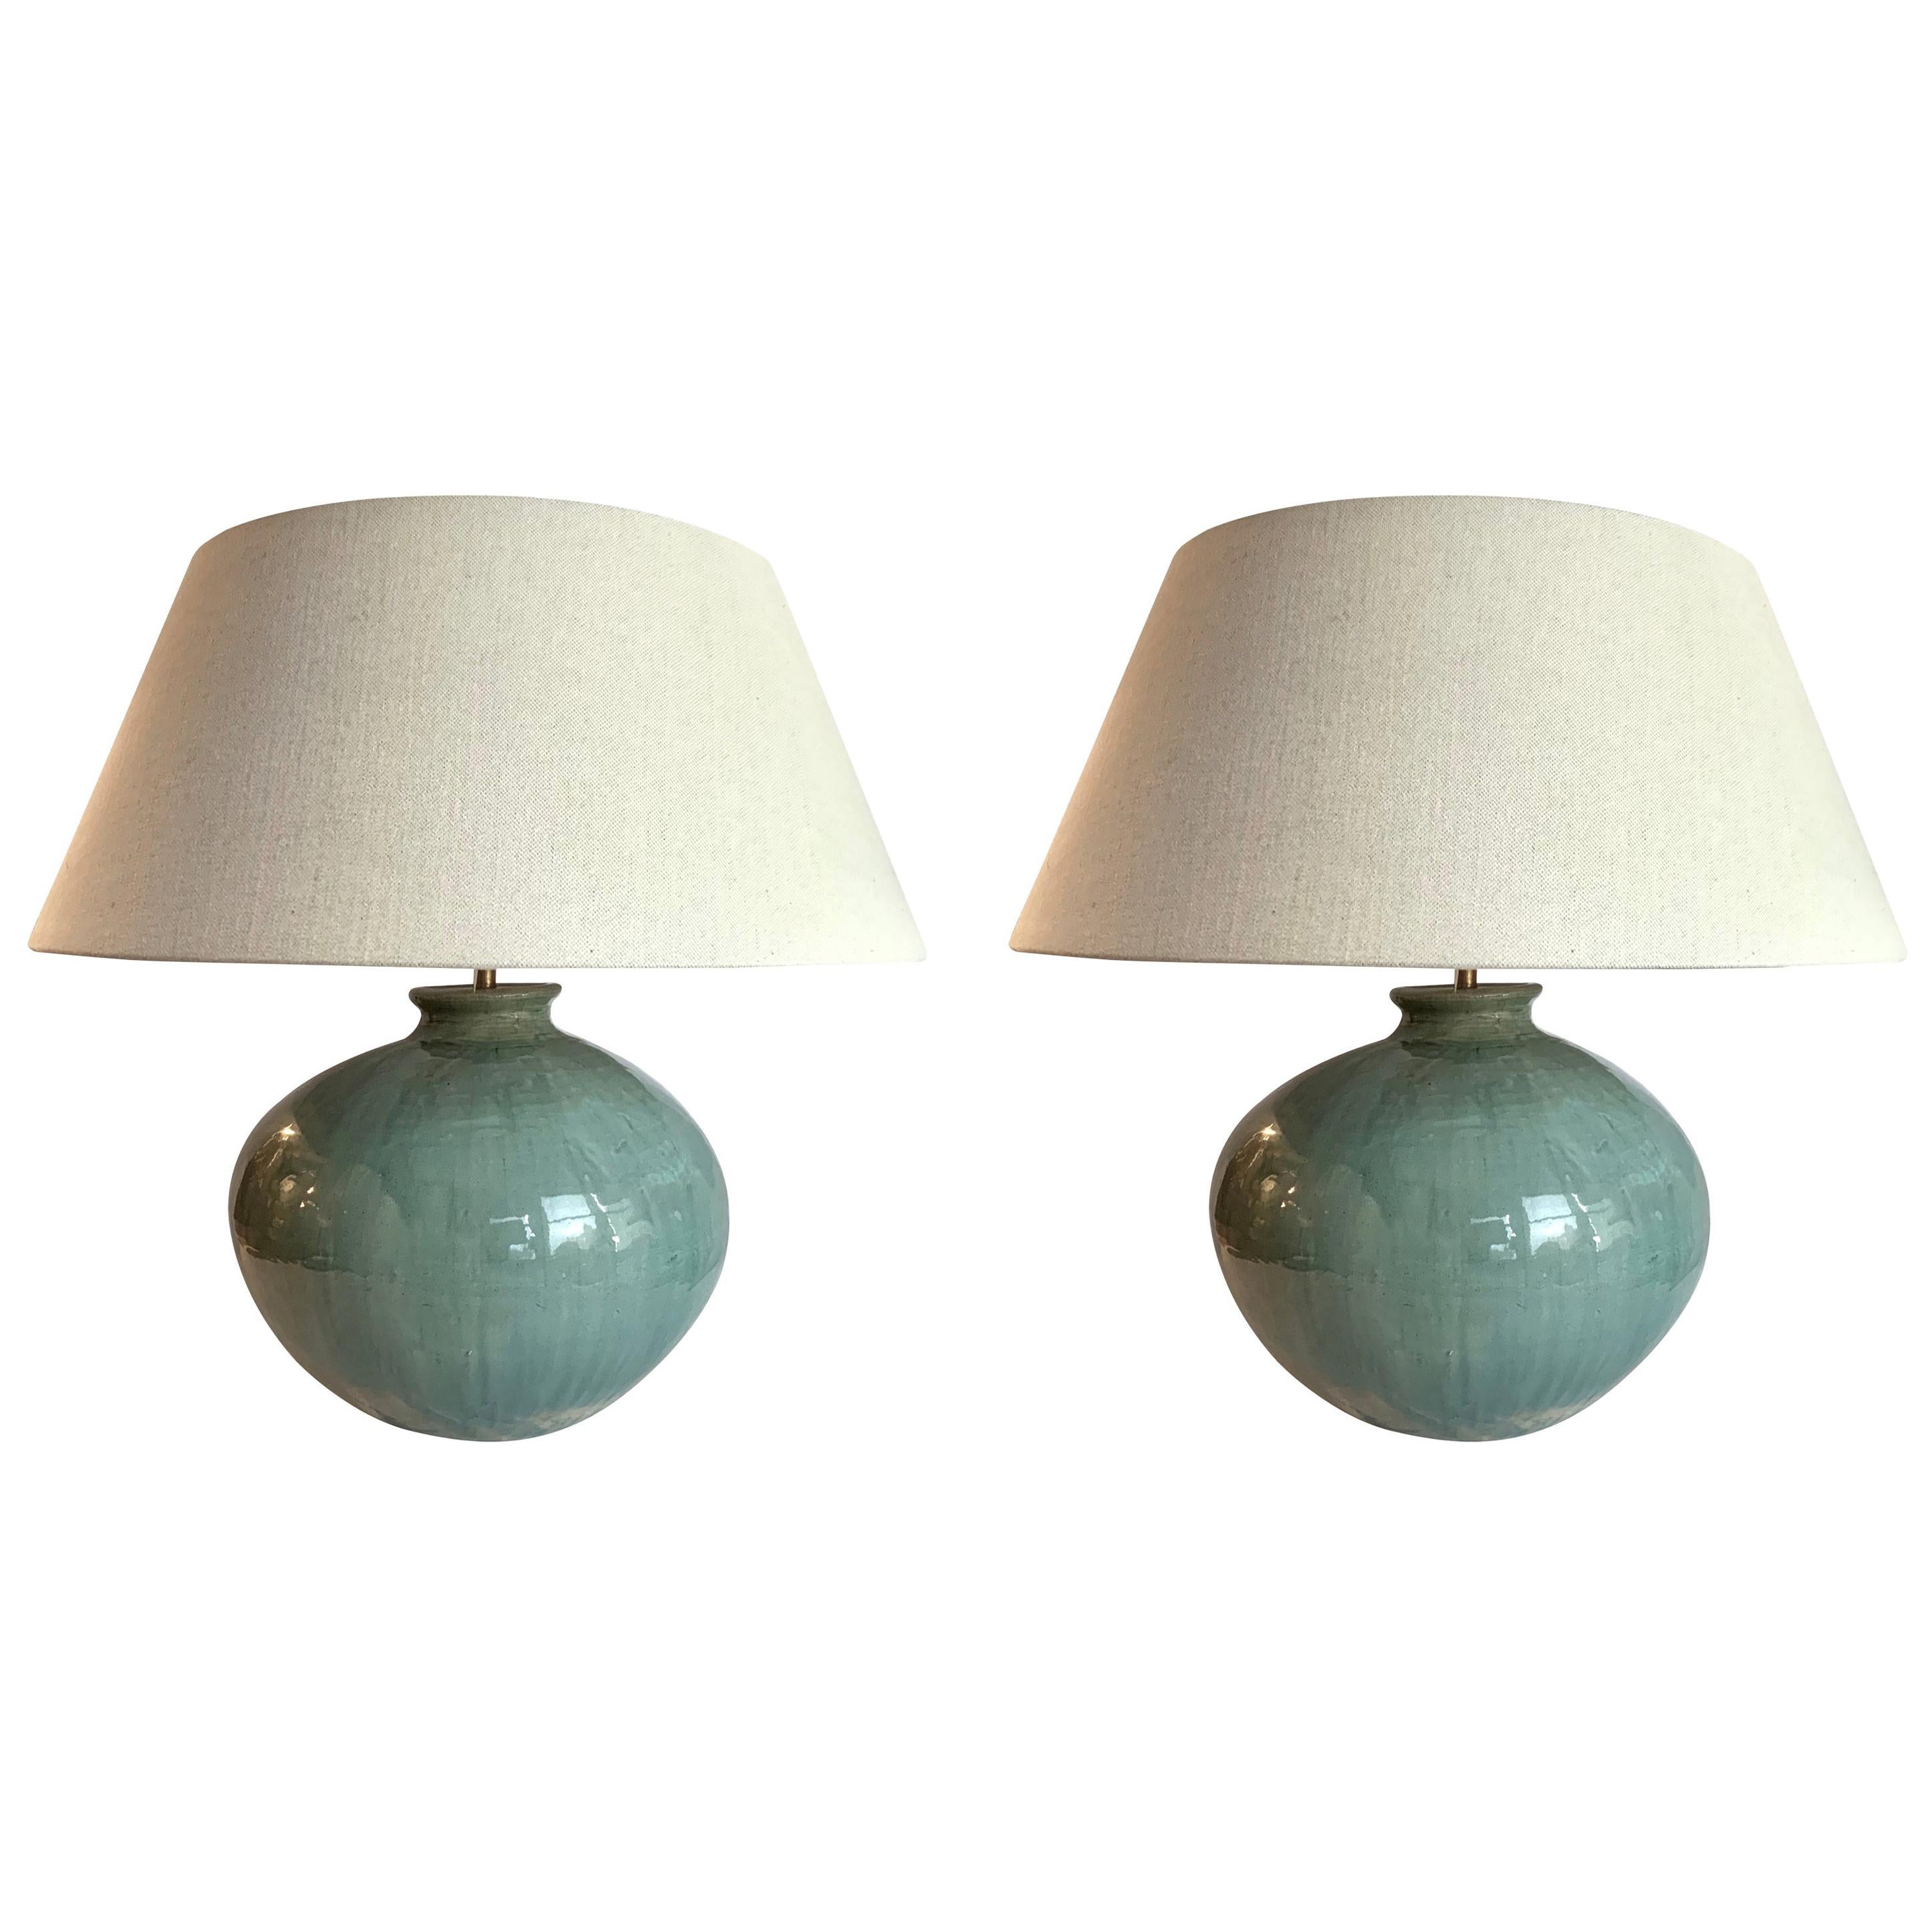 Washed Turquoise Round Base Pair Lamps, China, Contemporary